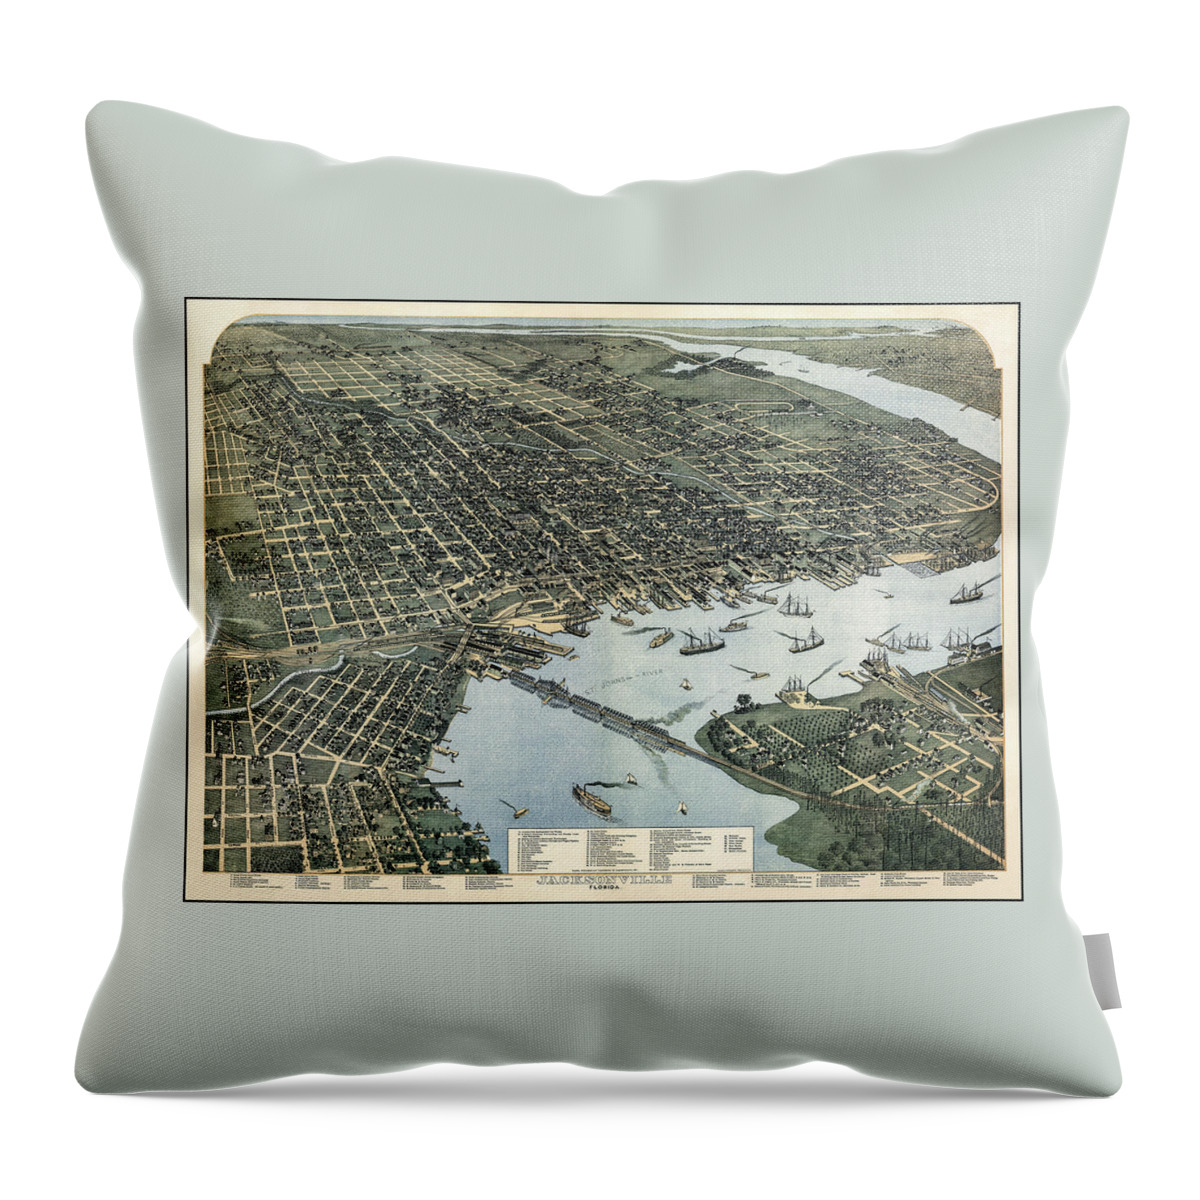 Jacksonville Throw Pillow featuring the photograph Jacksonville Florida Vintage Map Birds Eye View 1893 by Carol Japp